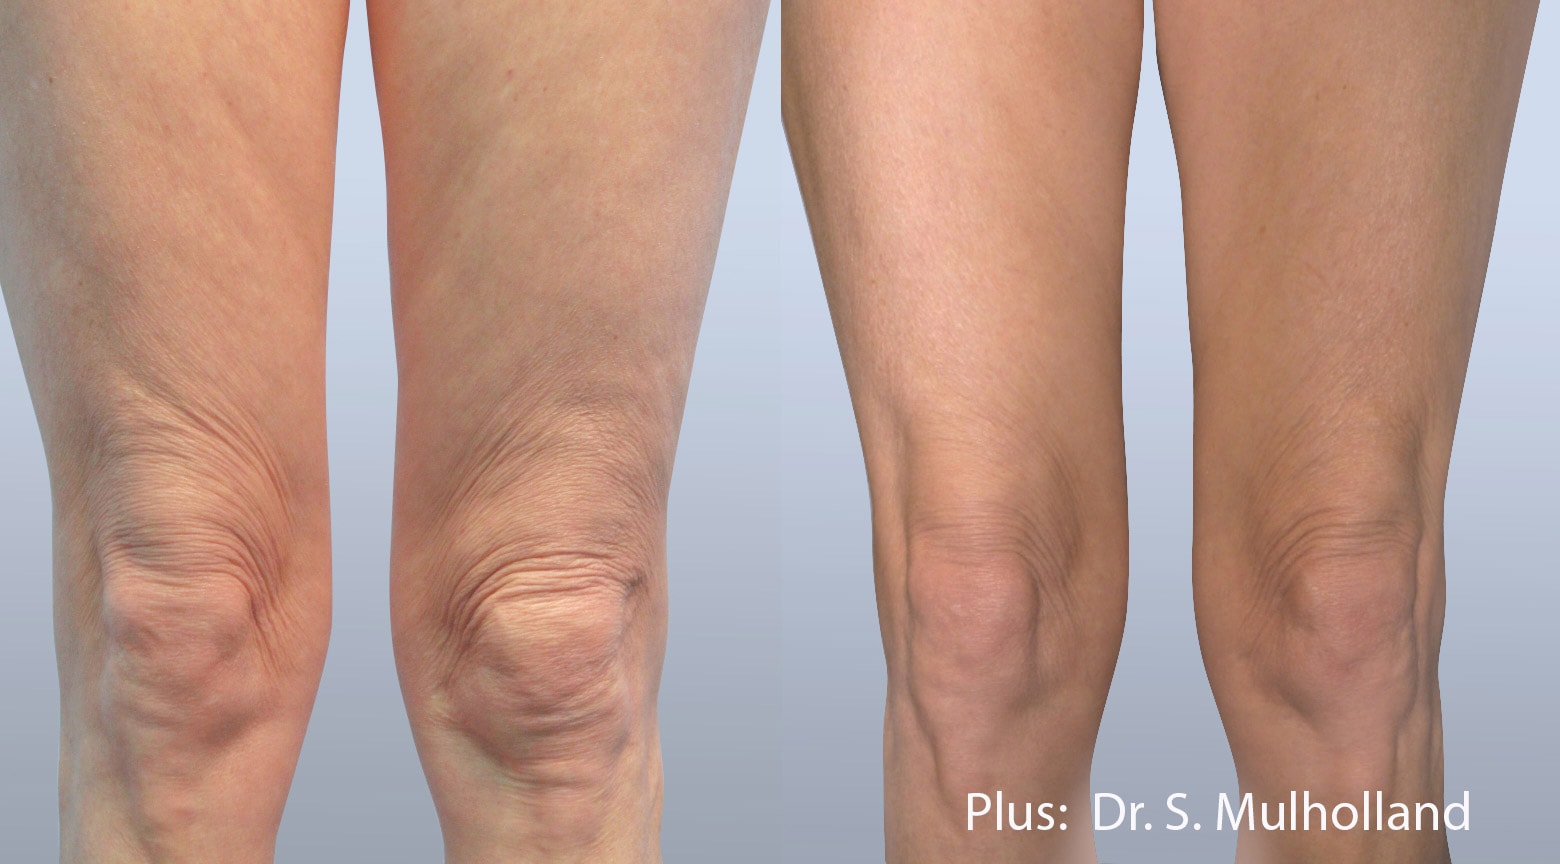 Before and After photos of Forma Plus treatments tightening loose skin and eliminating wrinkles around a woman’s knees